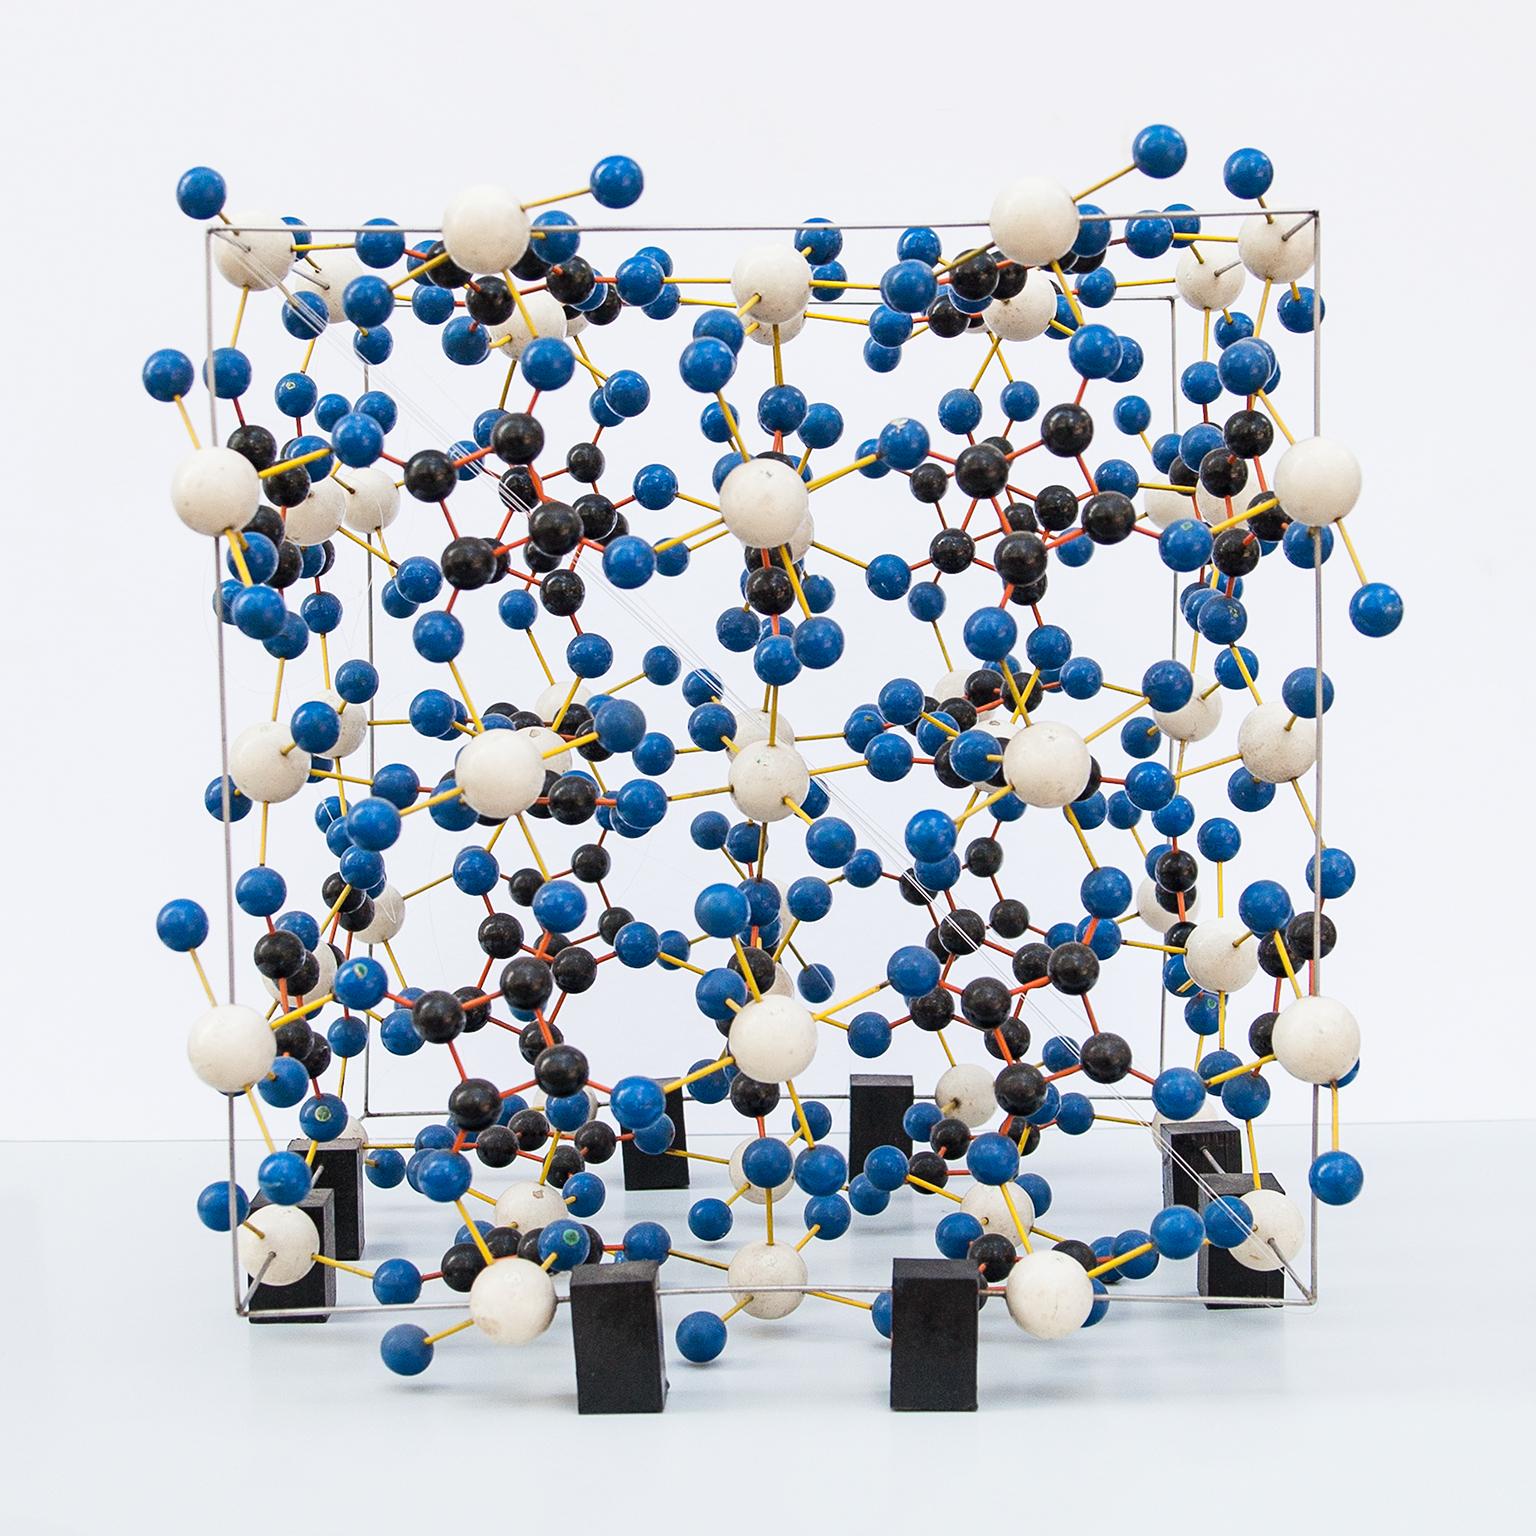 Original vintage huge atomic model made in blue, white and black lacquered wooden balls on a black painted iron construction. You can hang it on your ceiling as an art object, put it the floor or on your living room sideboard.